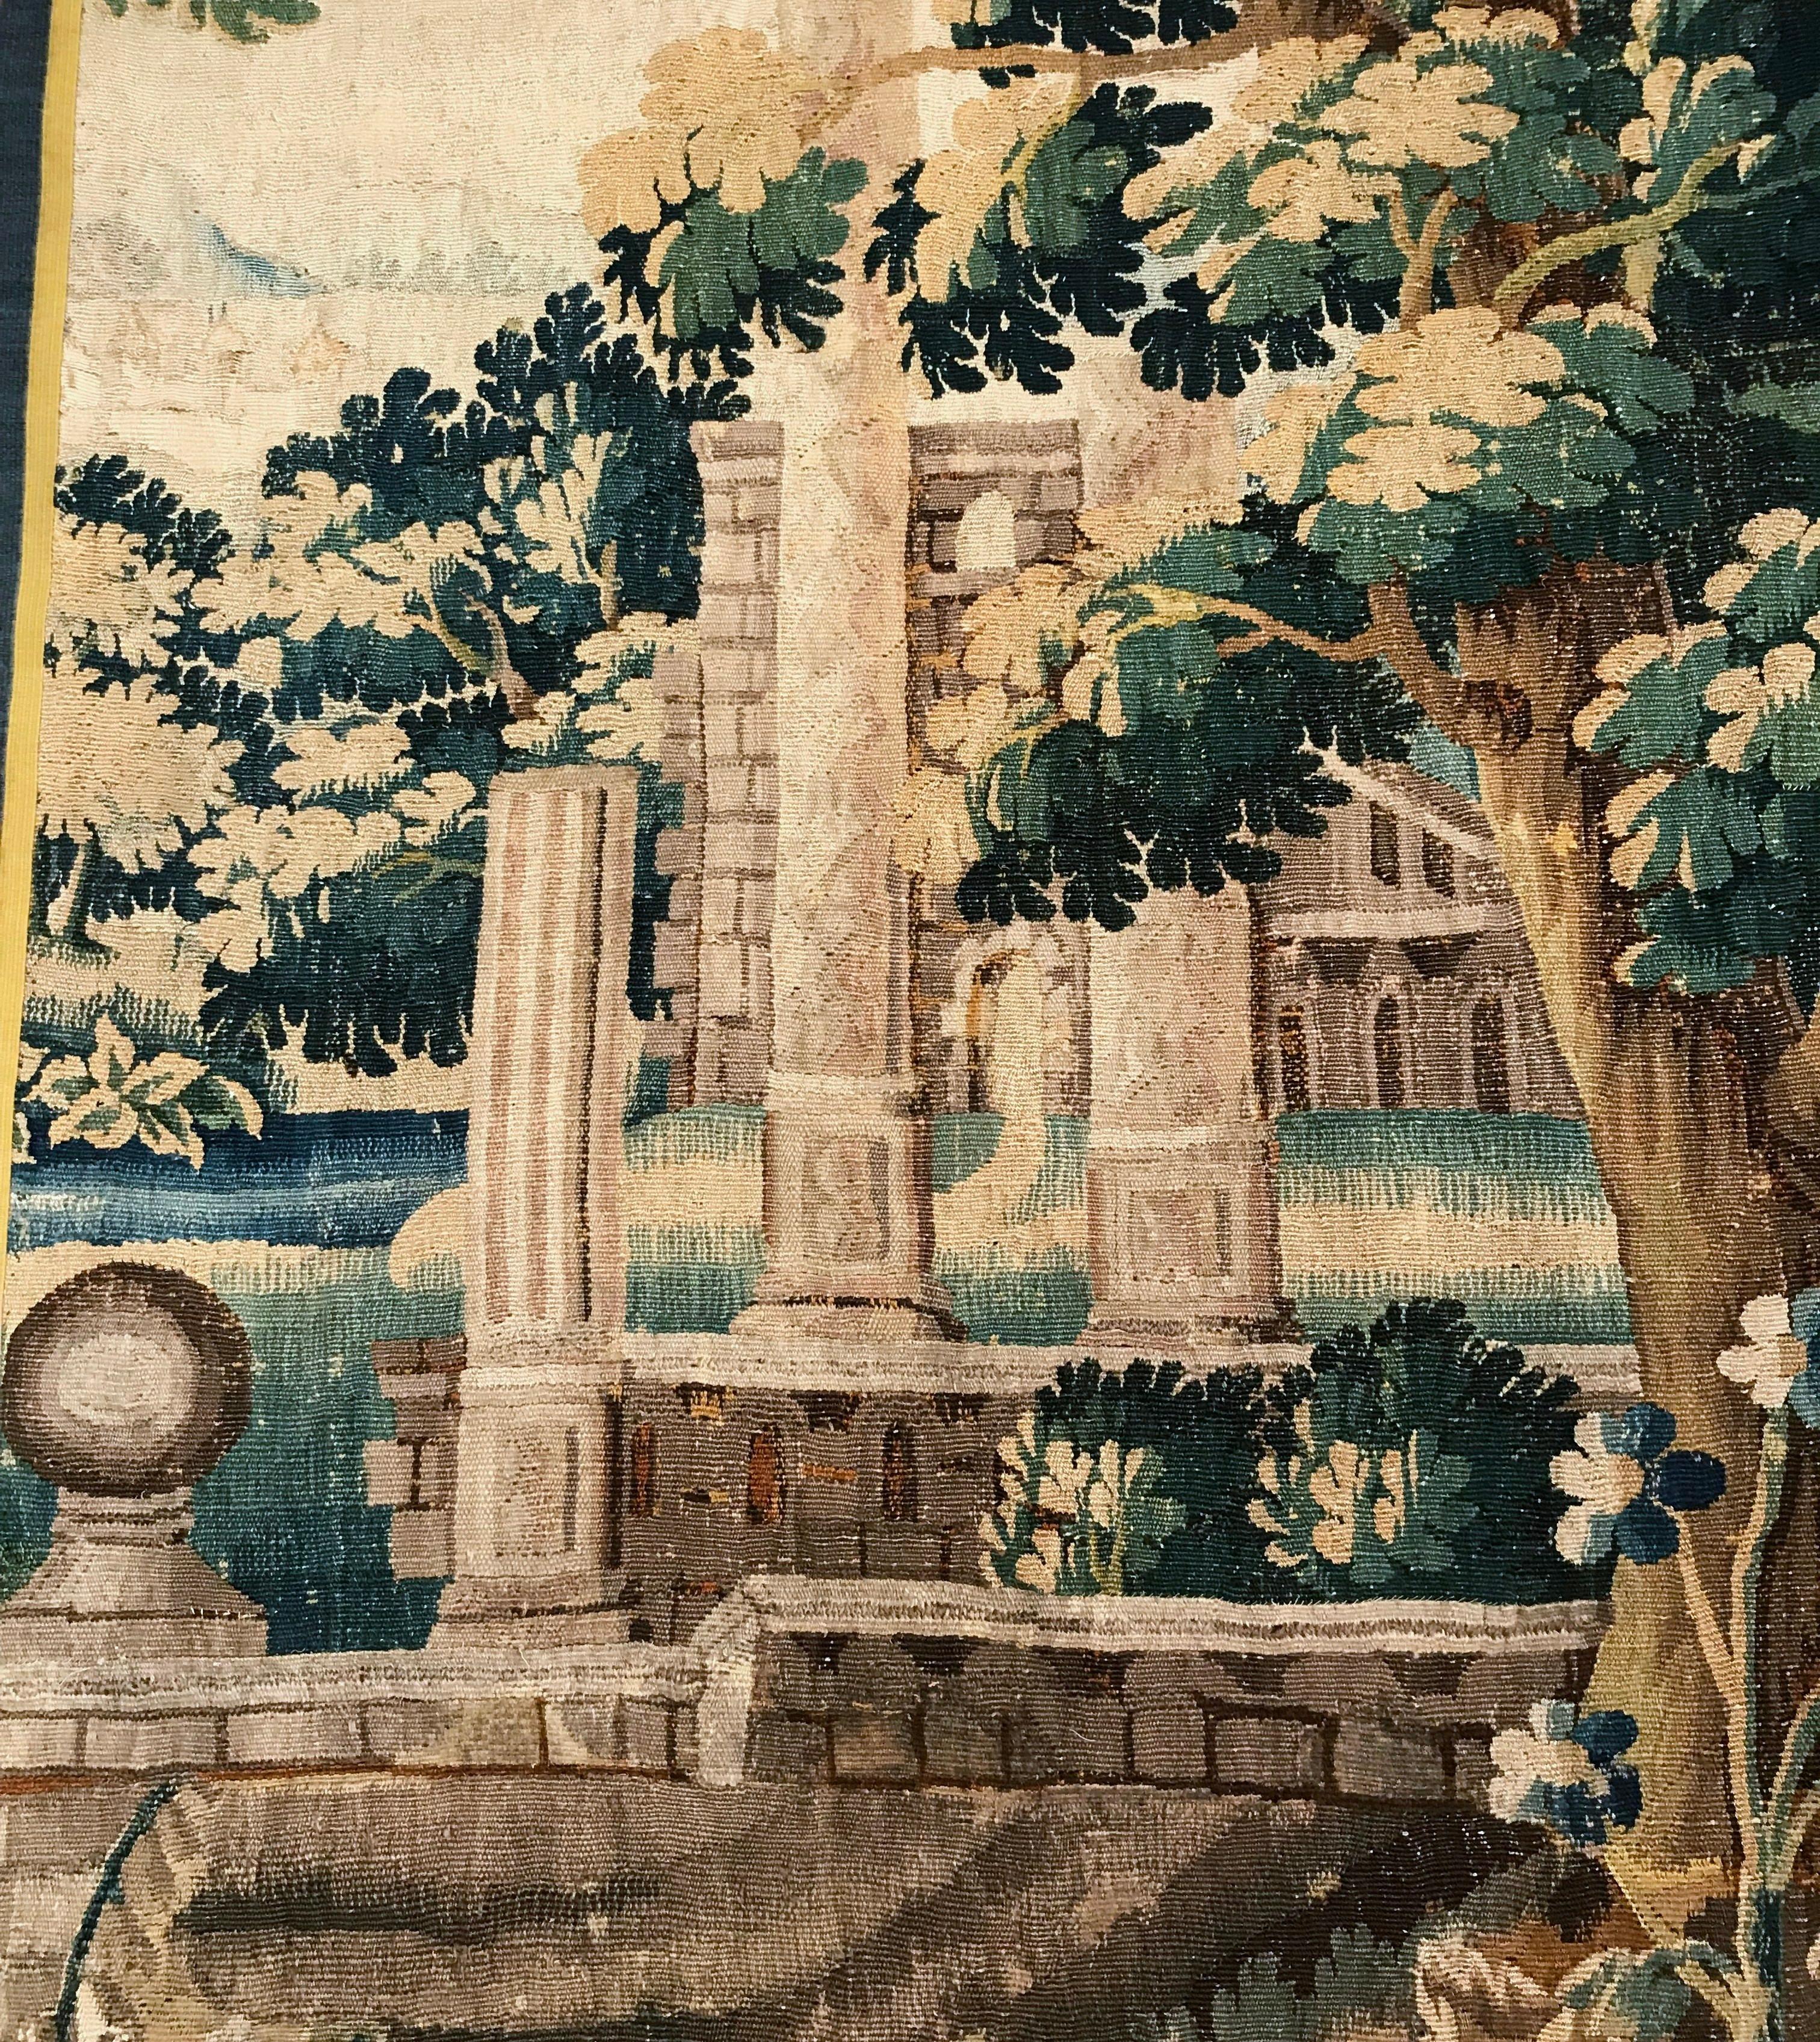 Hand-Woven 18th Century French Aubusson Verdure Tapestry with Roman Ruins Structure